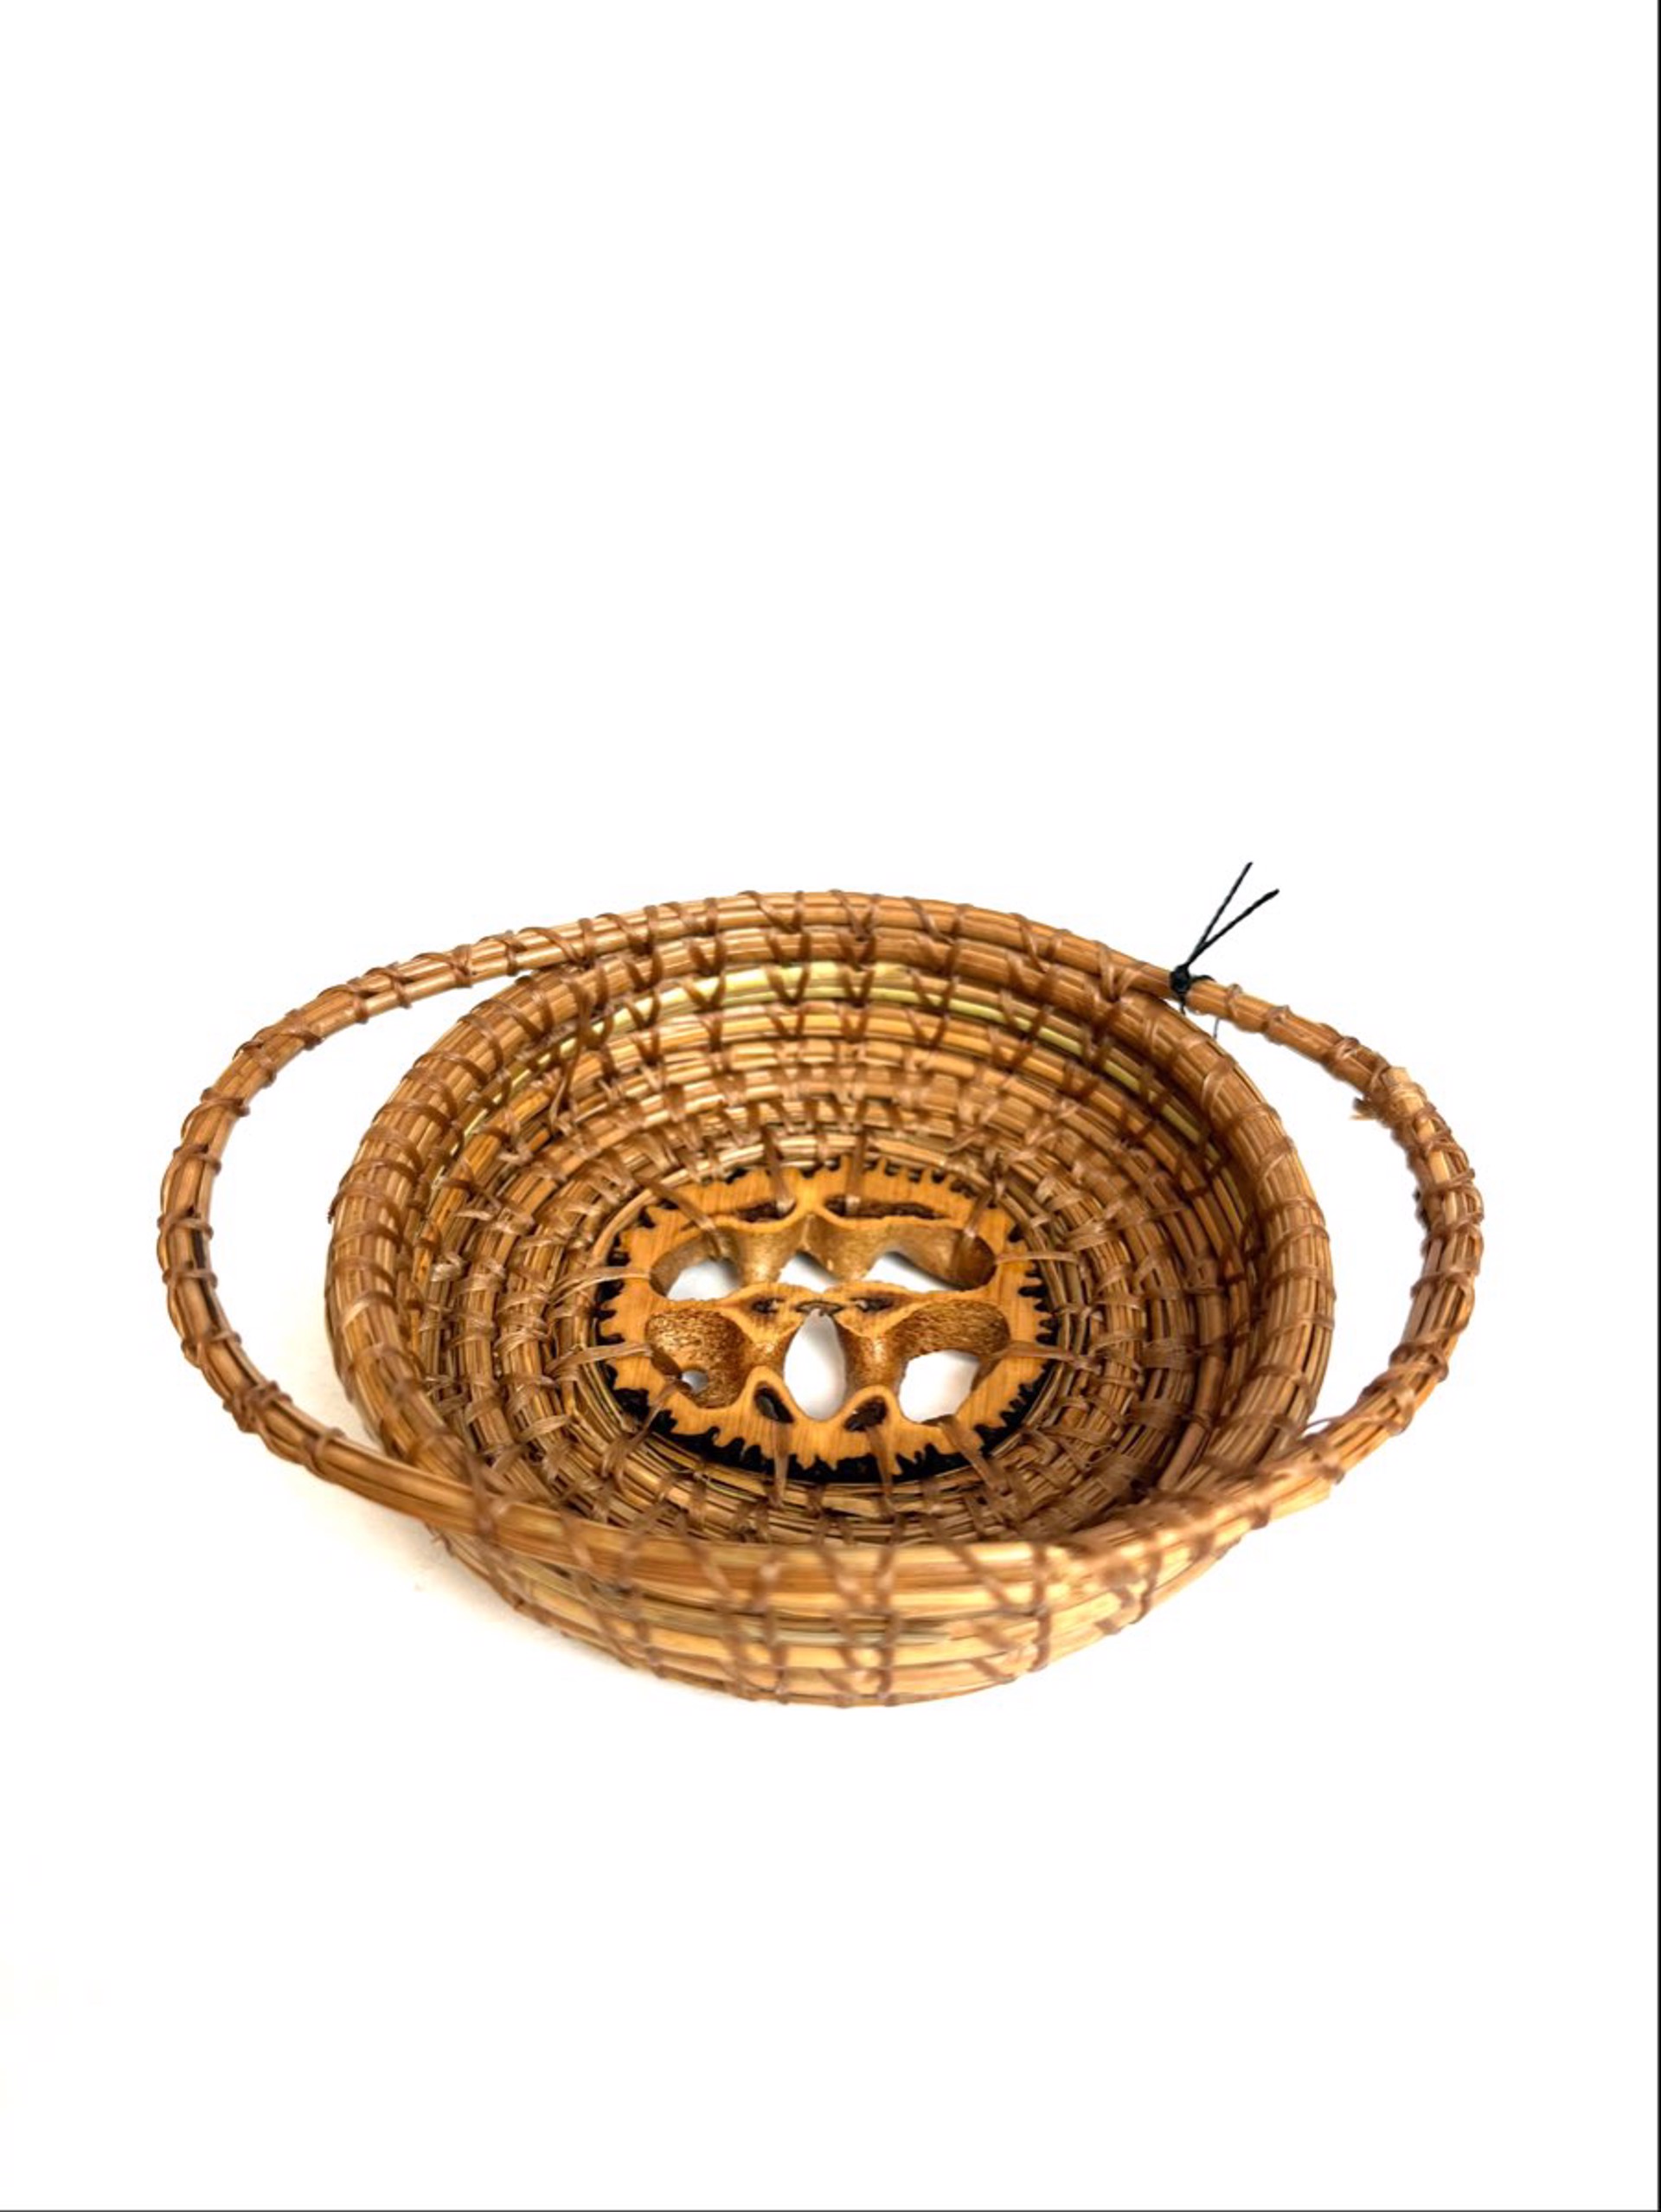 Basket with Walnut Center and Side Handles by Jacqueline Green